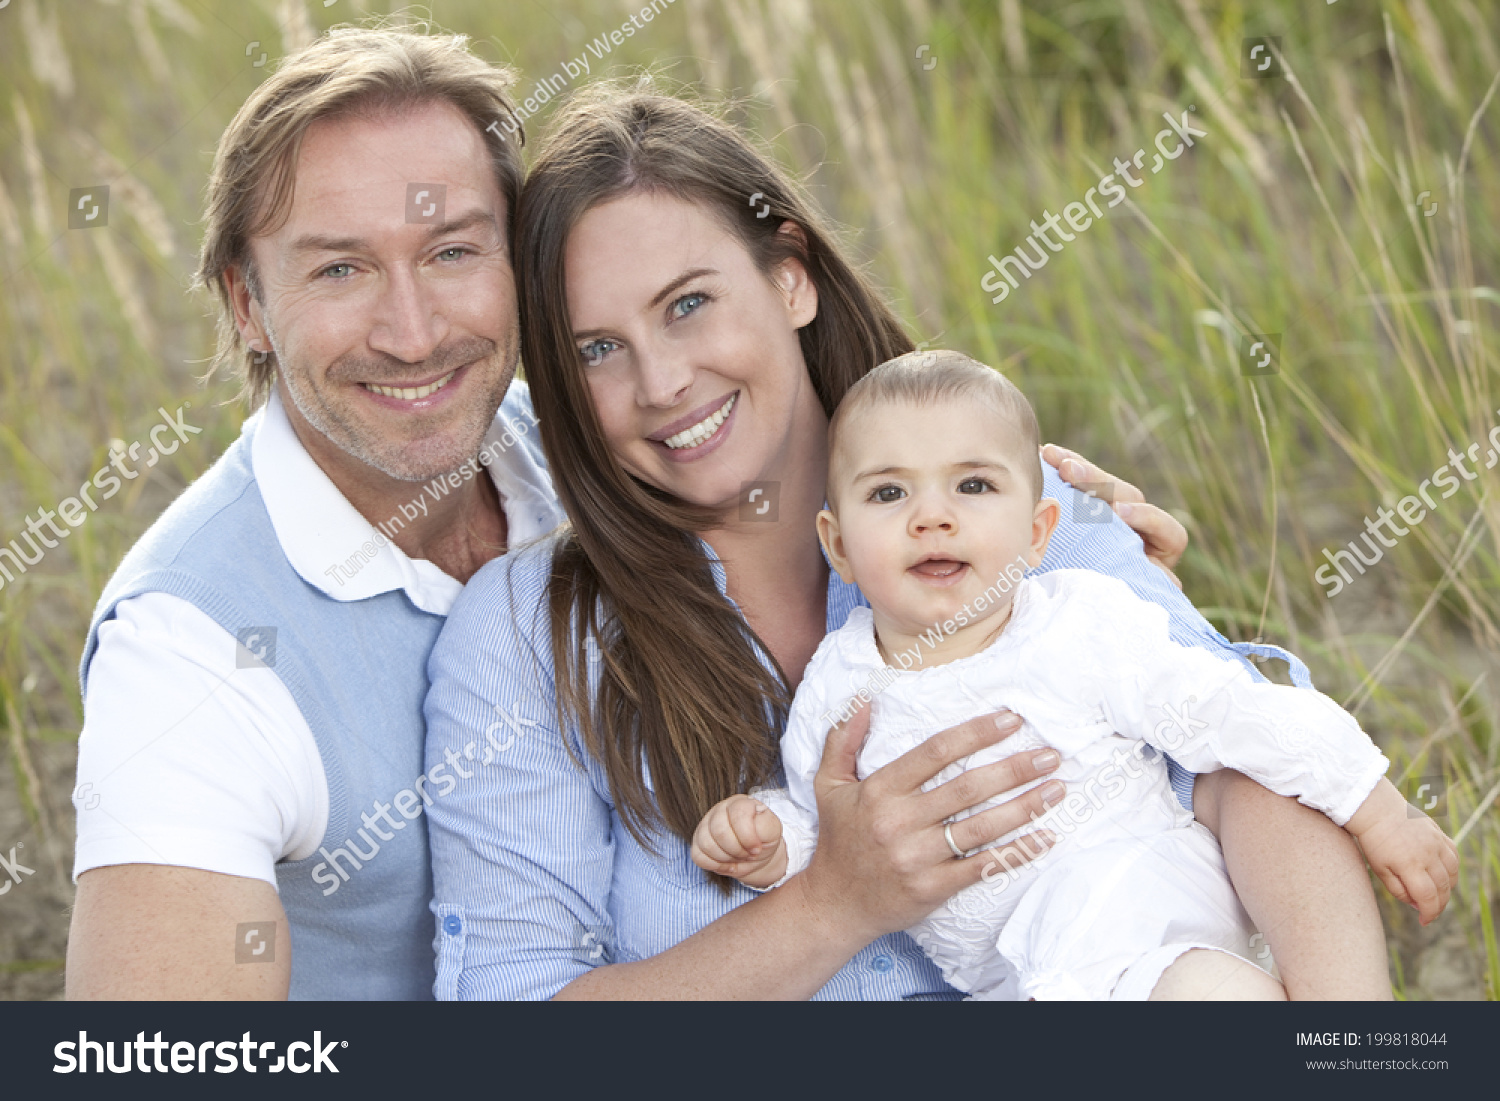 Germany, Bavaria, Mother and father with baby girl, smiling #199818044